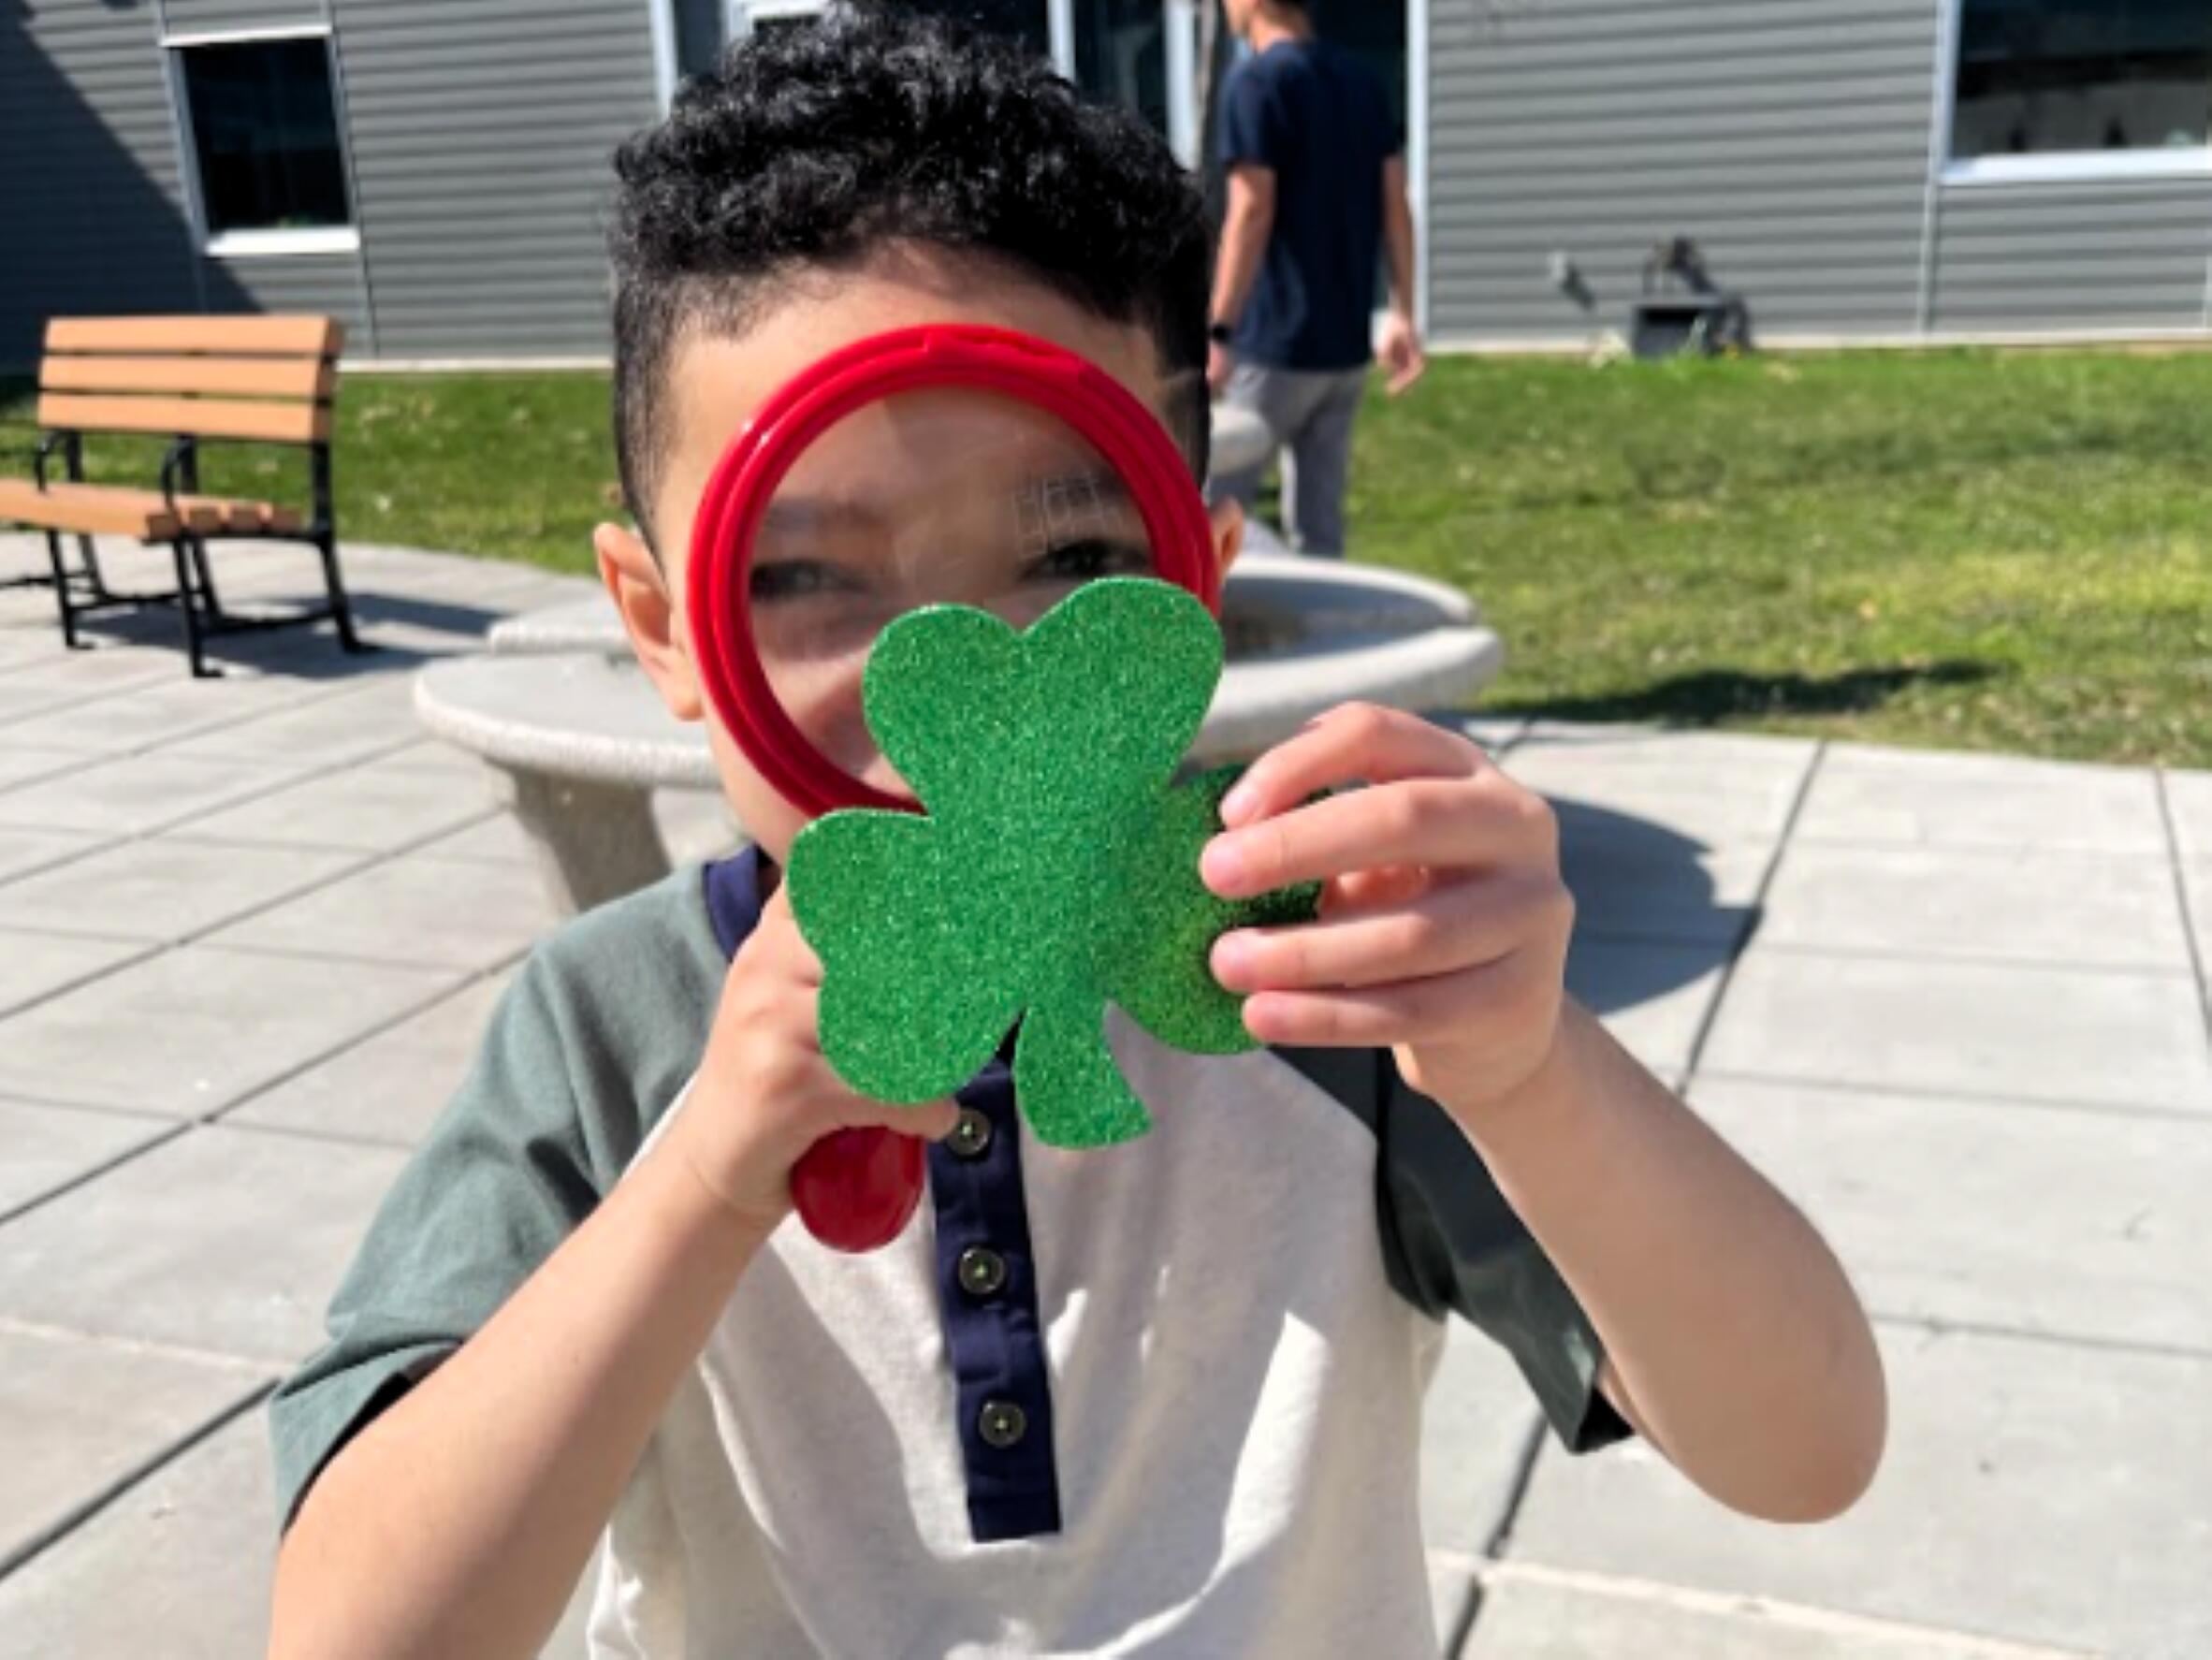 Enf- student looking through magnifying glass at a glitter shamrock